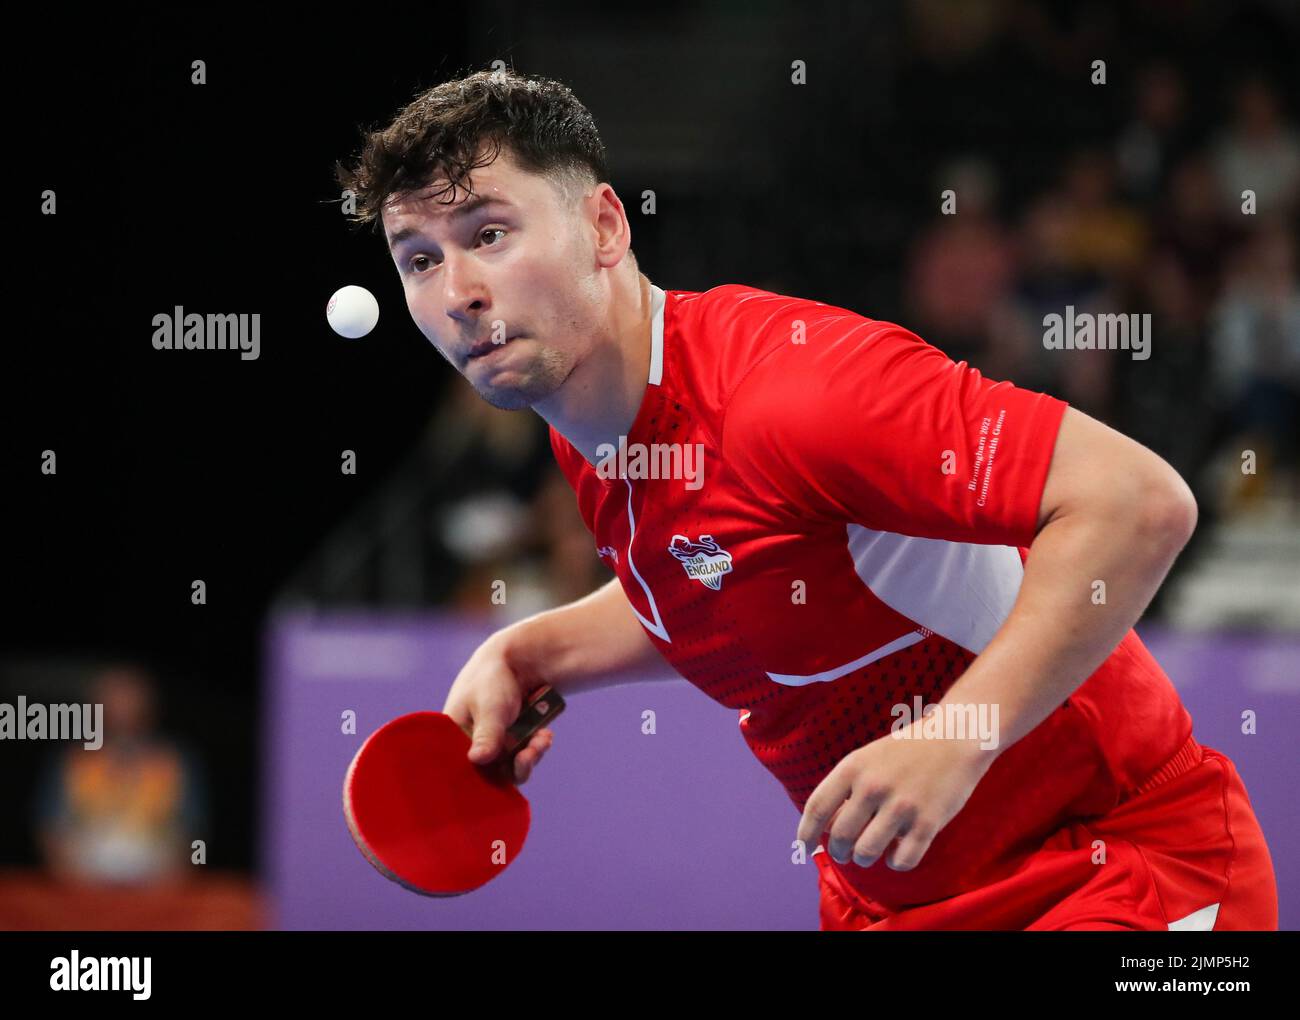 England’s Ross Wilson competes during the Para Table Tennis Men's Singles Classes 8-10 Bronze Medal match against Nigeria’s Tajudeen Agunbiada at The NEC on day ten of the 2022 Commonwealth Games in Birmingham. Picture date: Sunday August 7, 2022. Stock Photo